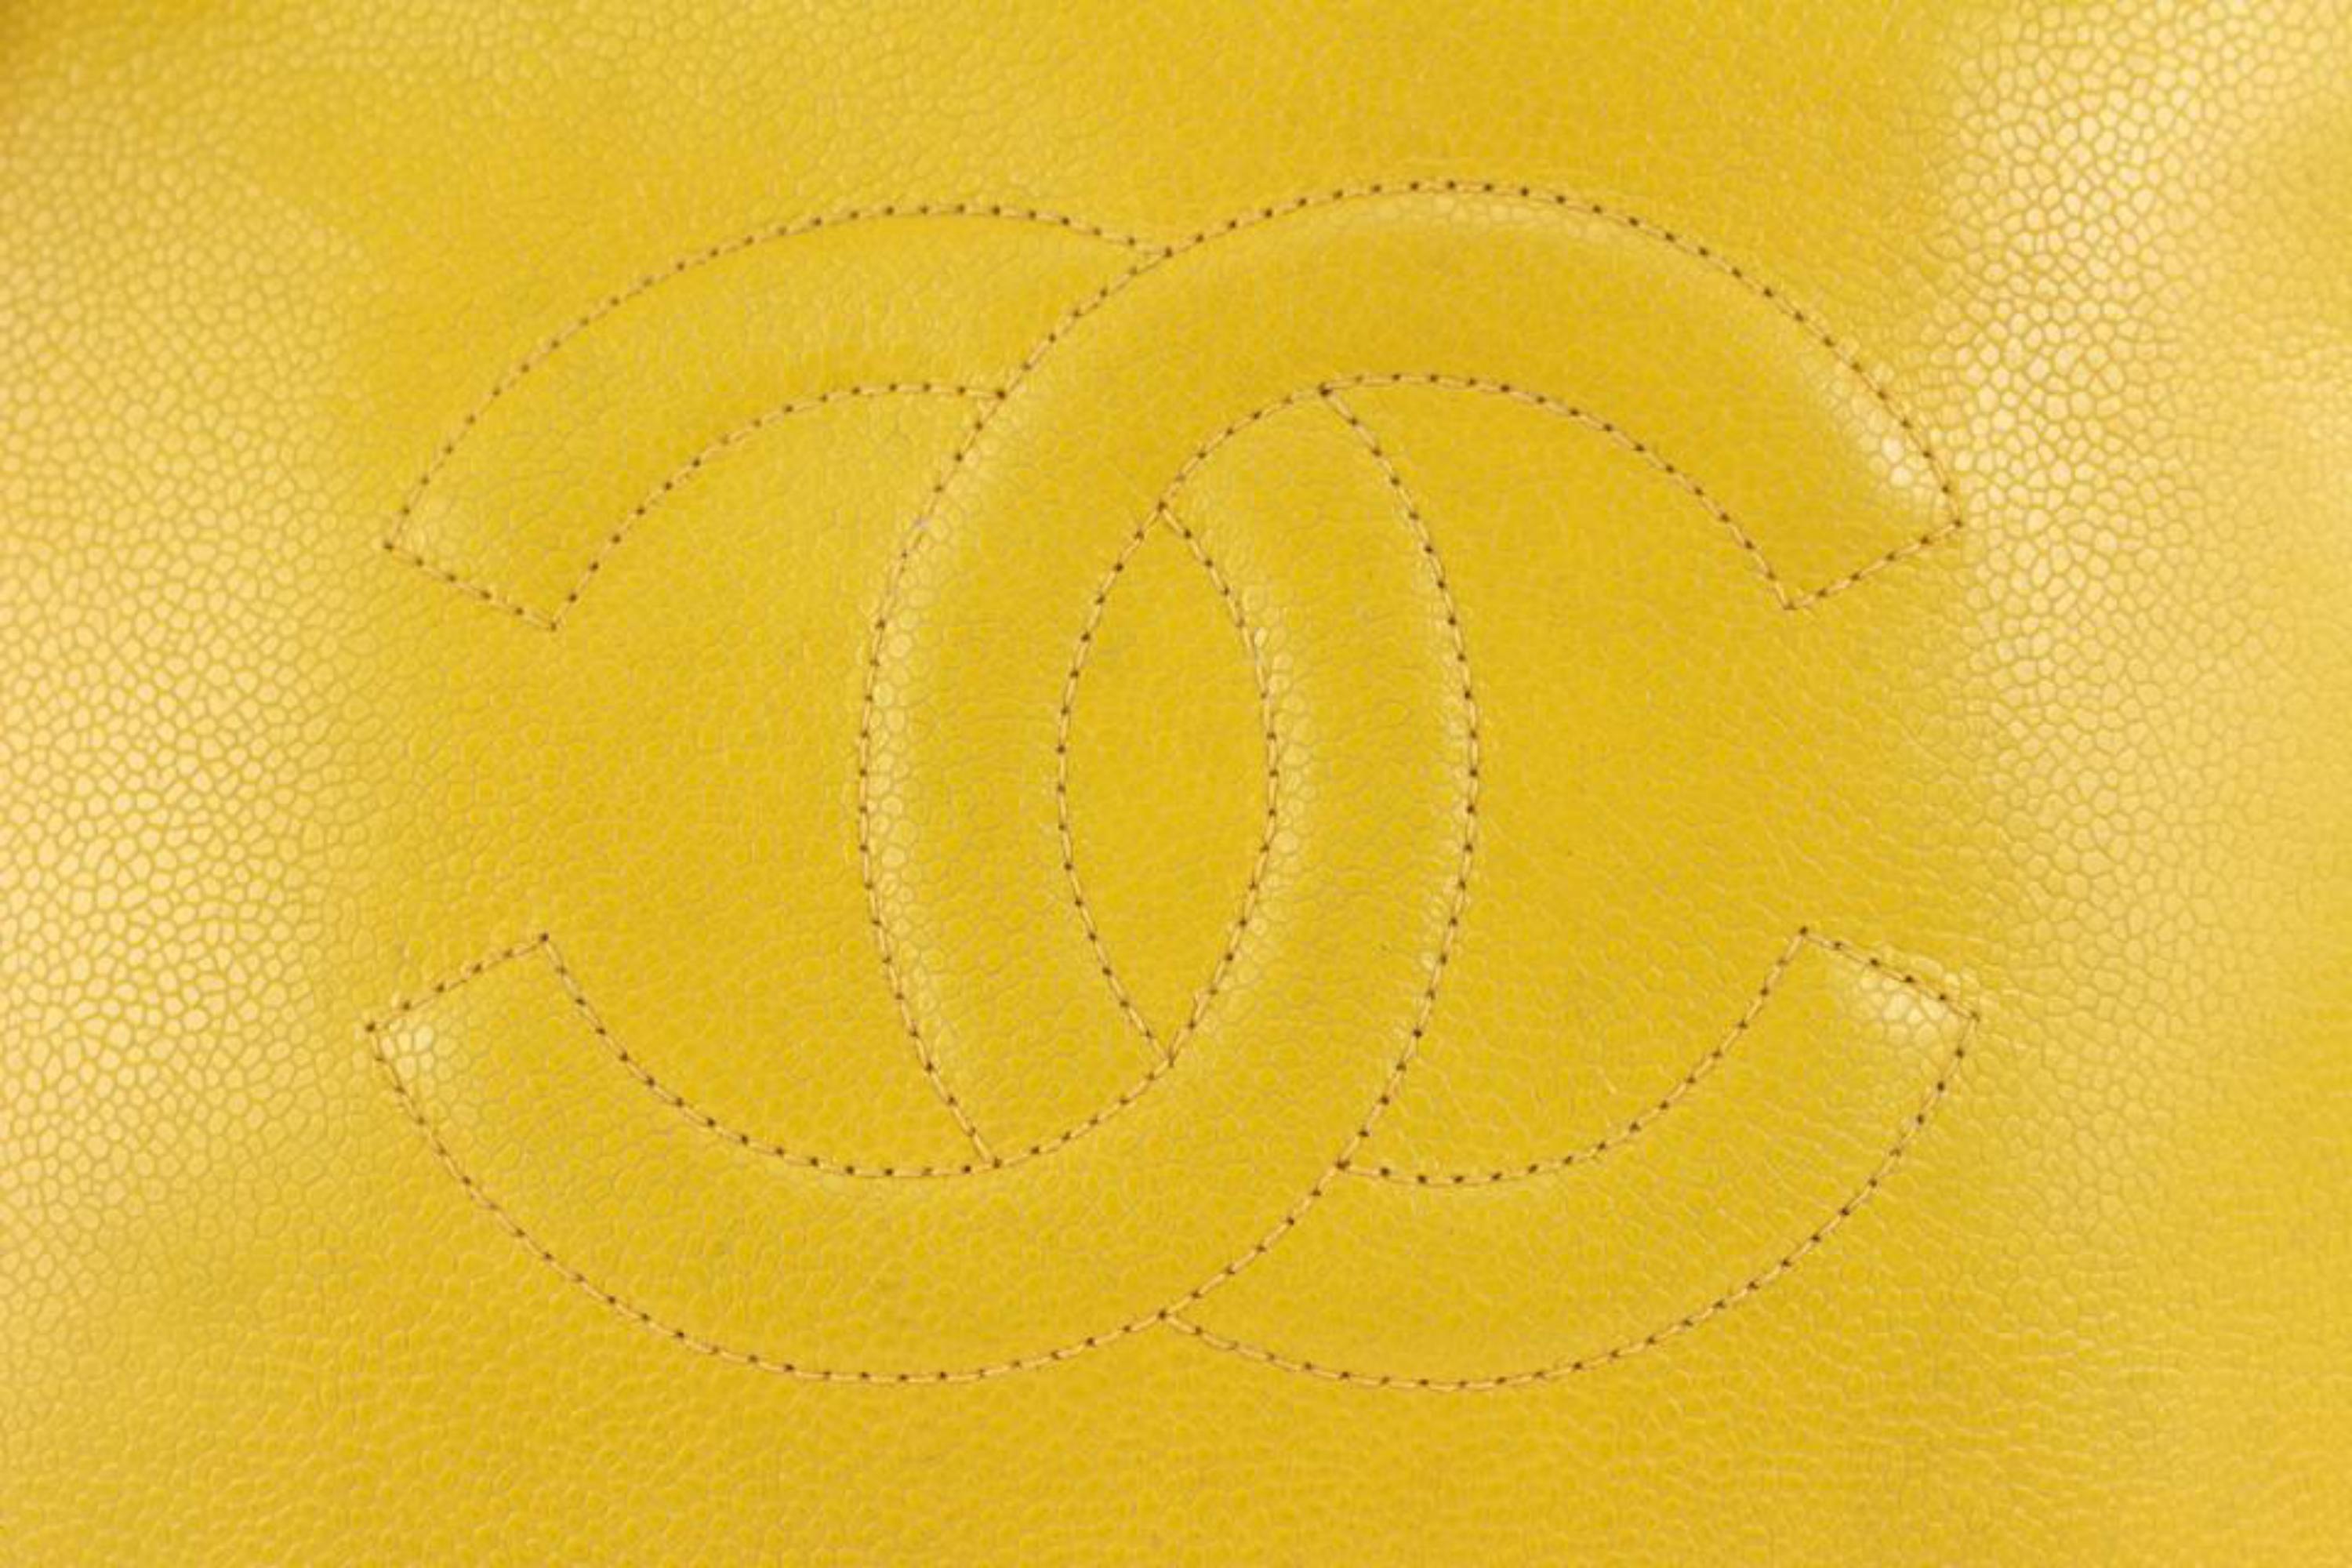 Women's Chanel Mustard Yellow Caviar Leather Timeless CC Chain Tote Bag 1115c5